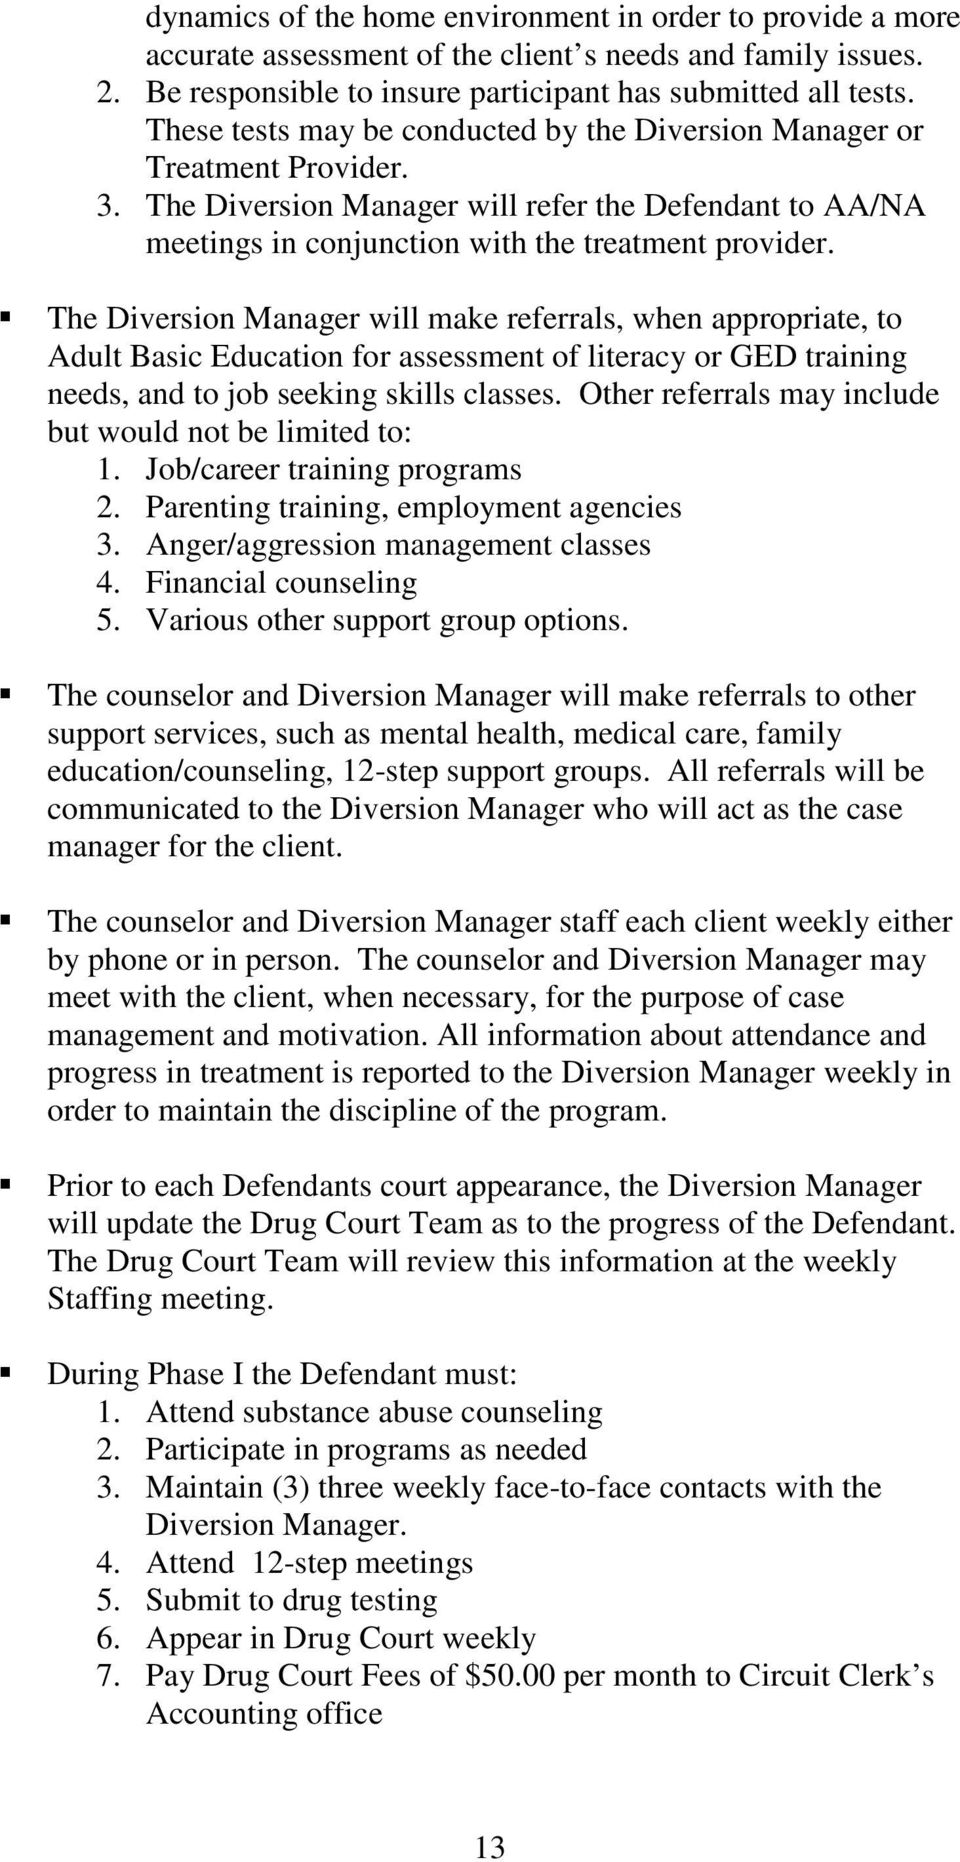 The Diversion Manager will make referrals, when appropriate, to Adult Basic Education for assessment of literacy or GED training needs, and to job seeking skills classes.